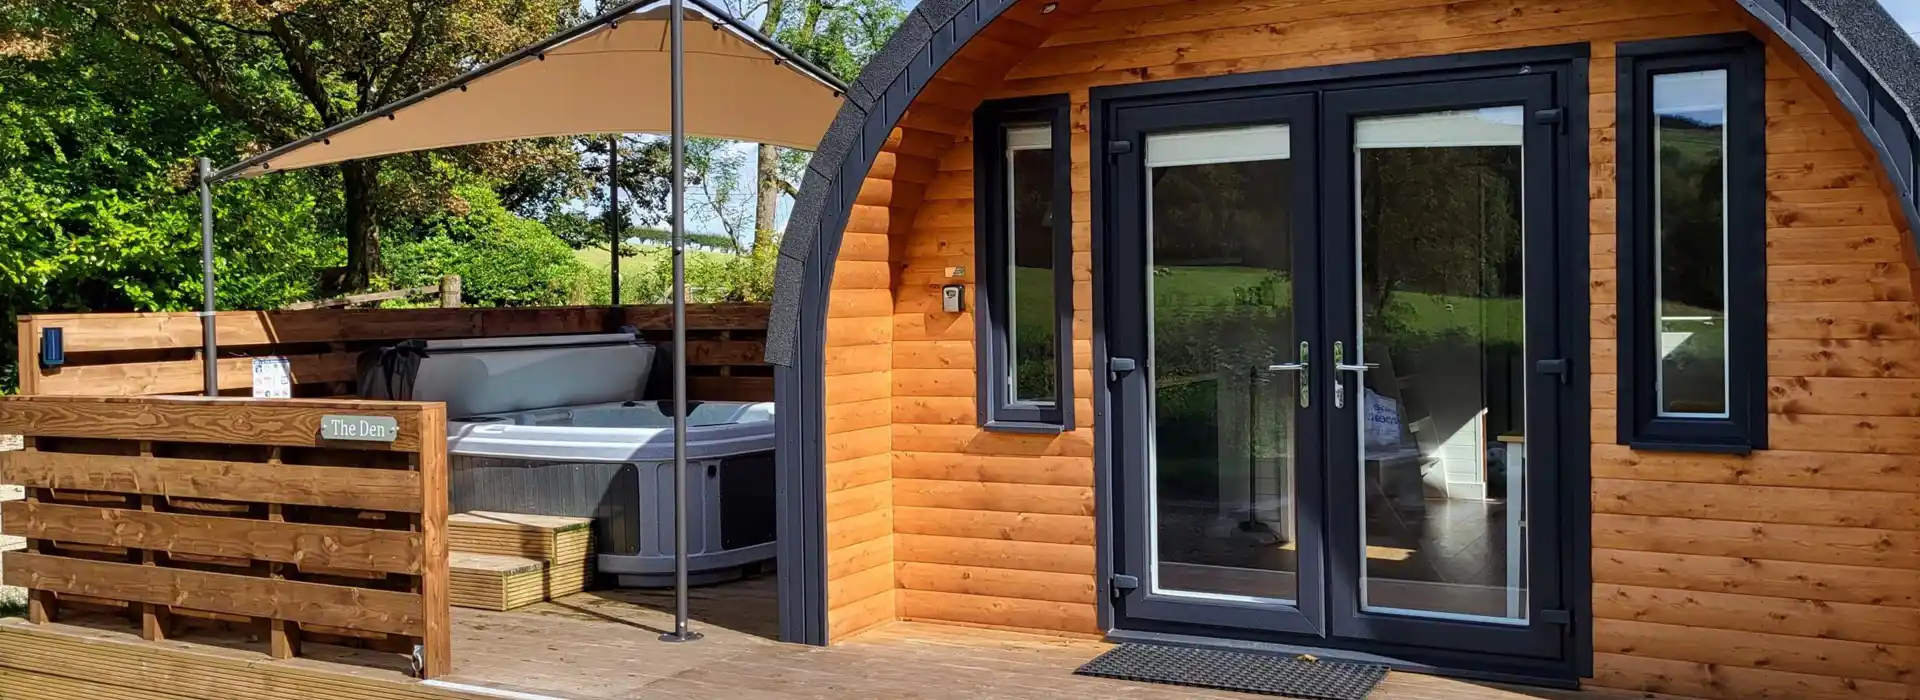 Camping and glamping pods in Clydebank